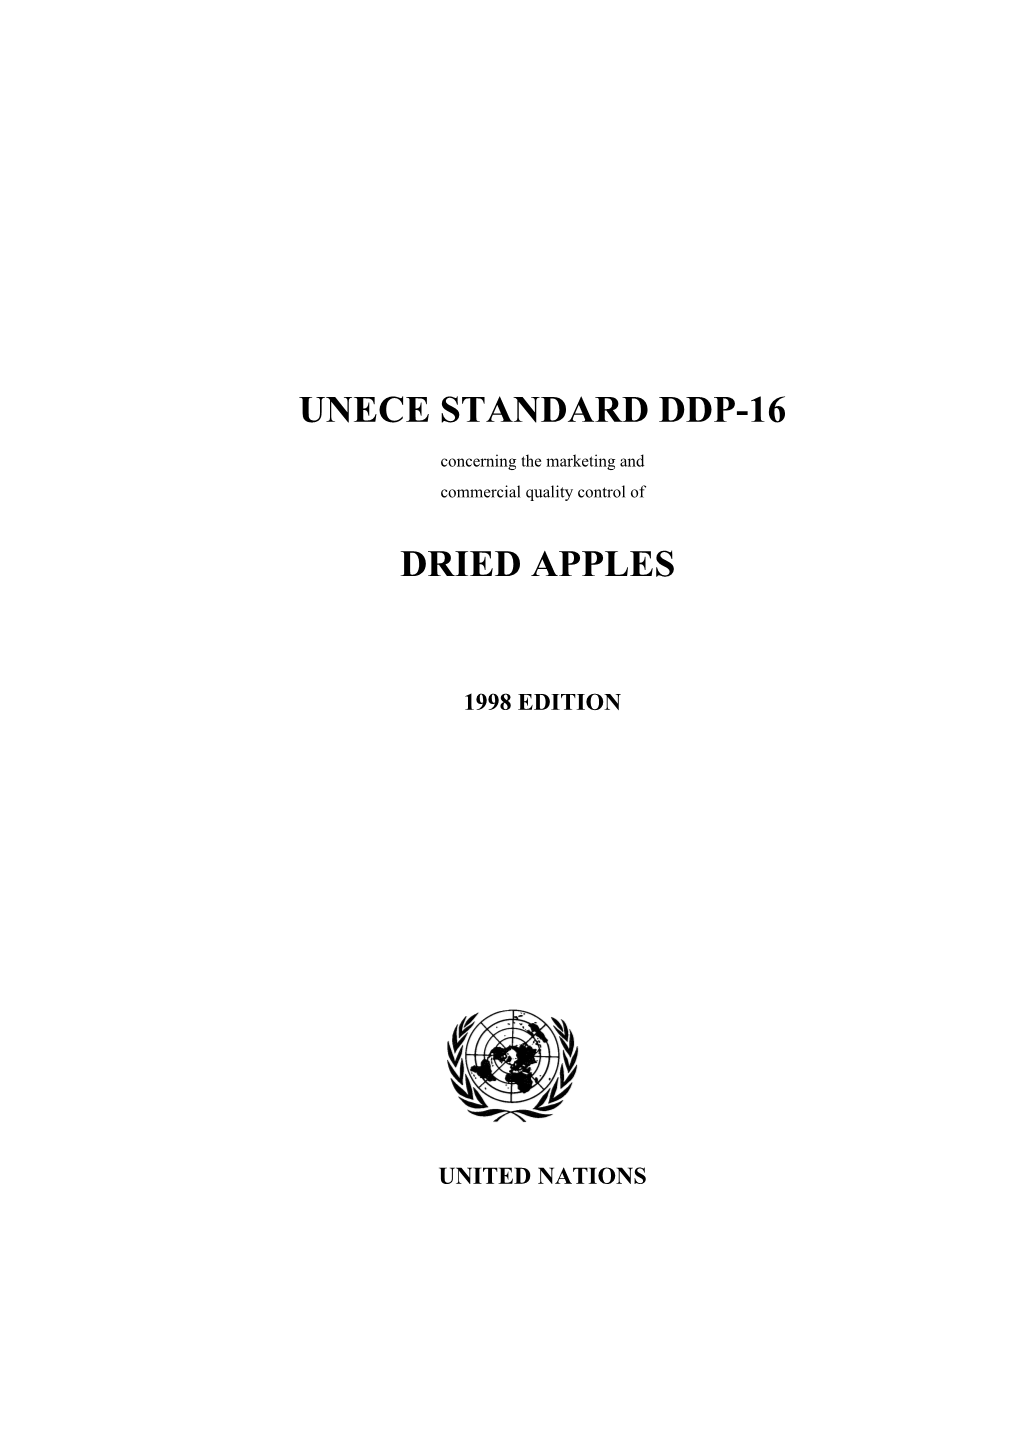 UNECE Standard for Dried Apples (DDP-16)